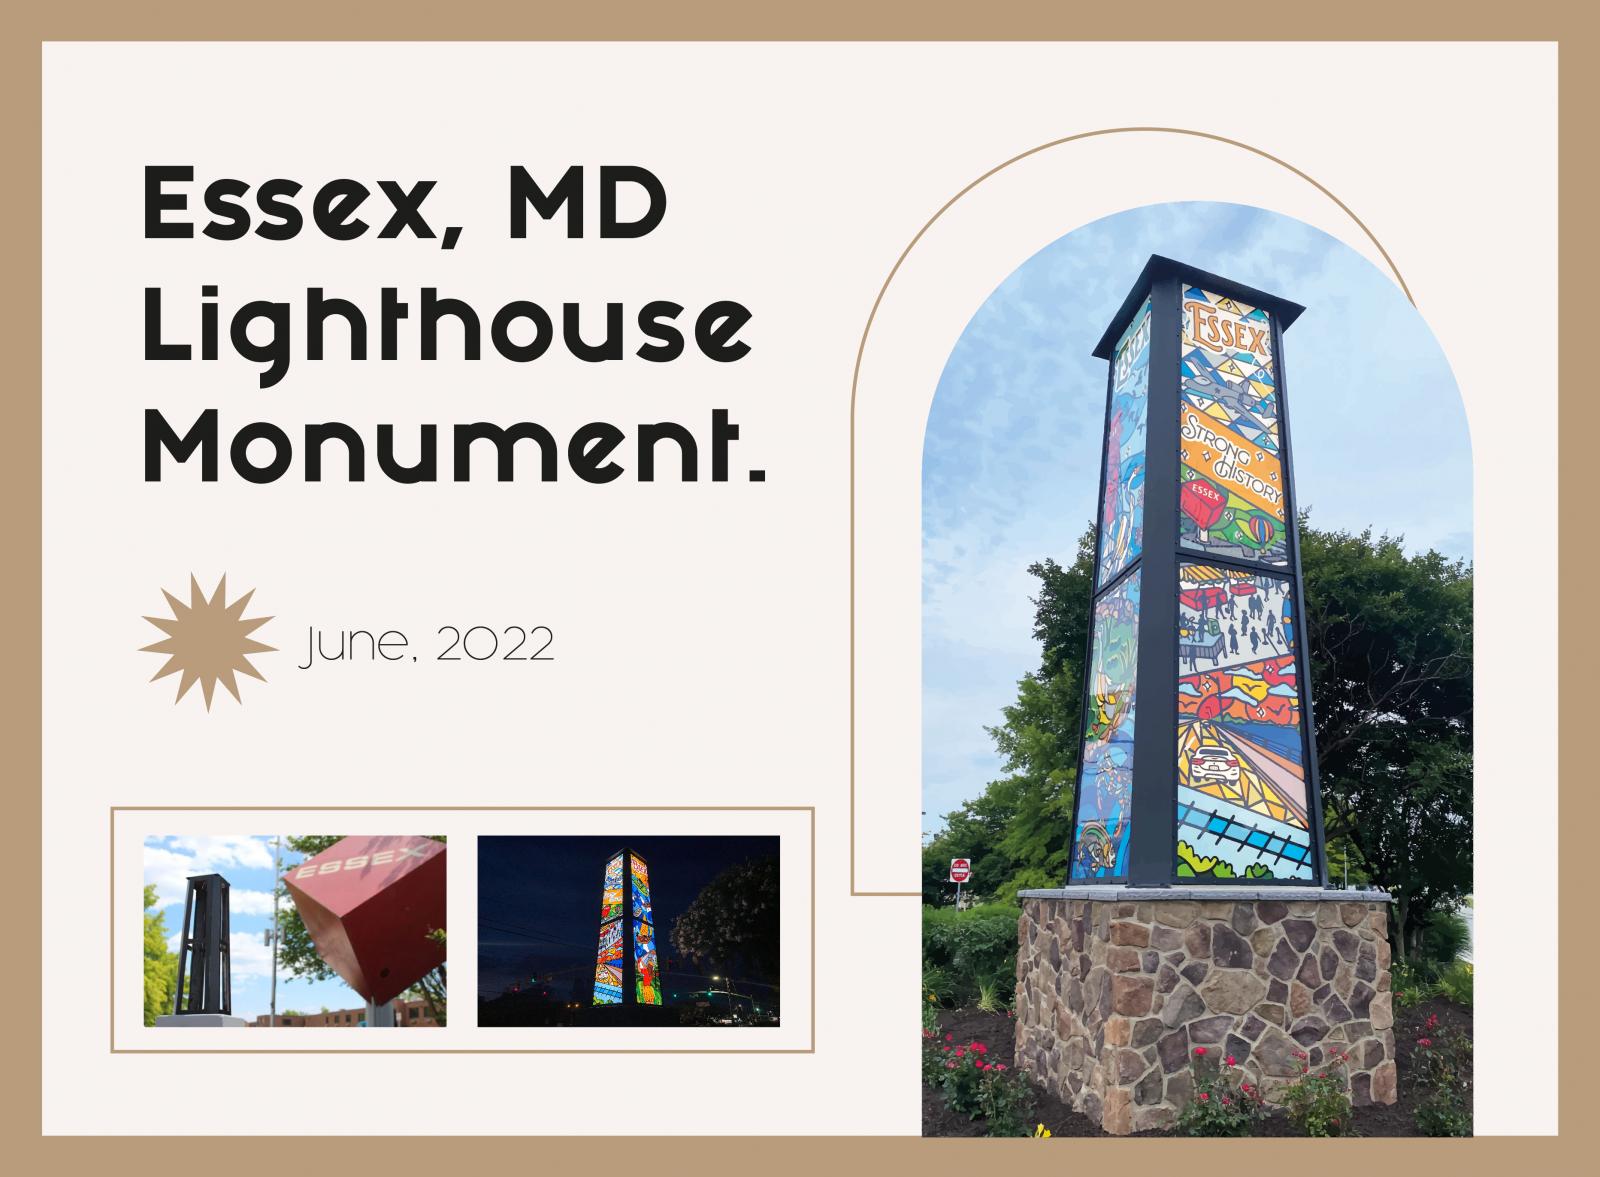 Designed and illustrated the brand new lighthouse monument in a high-traffic area (30,000 people per day) in the city of Essex, Maryland to replace the iconic Essex Cube.
Contracted and financed by the Chesapeake Gateway Chamber of Commerce, this design showcases the various element's of the city's identity.
The design was featured on the front page of the local newspaper, The Peak.

Panel artwork by Camila Leão & metal sculpture by Tim Scoefield.
June, 2022.